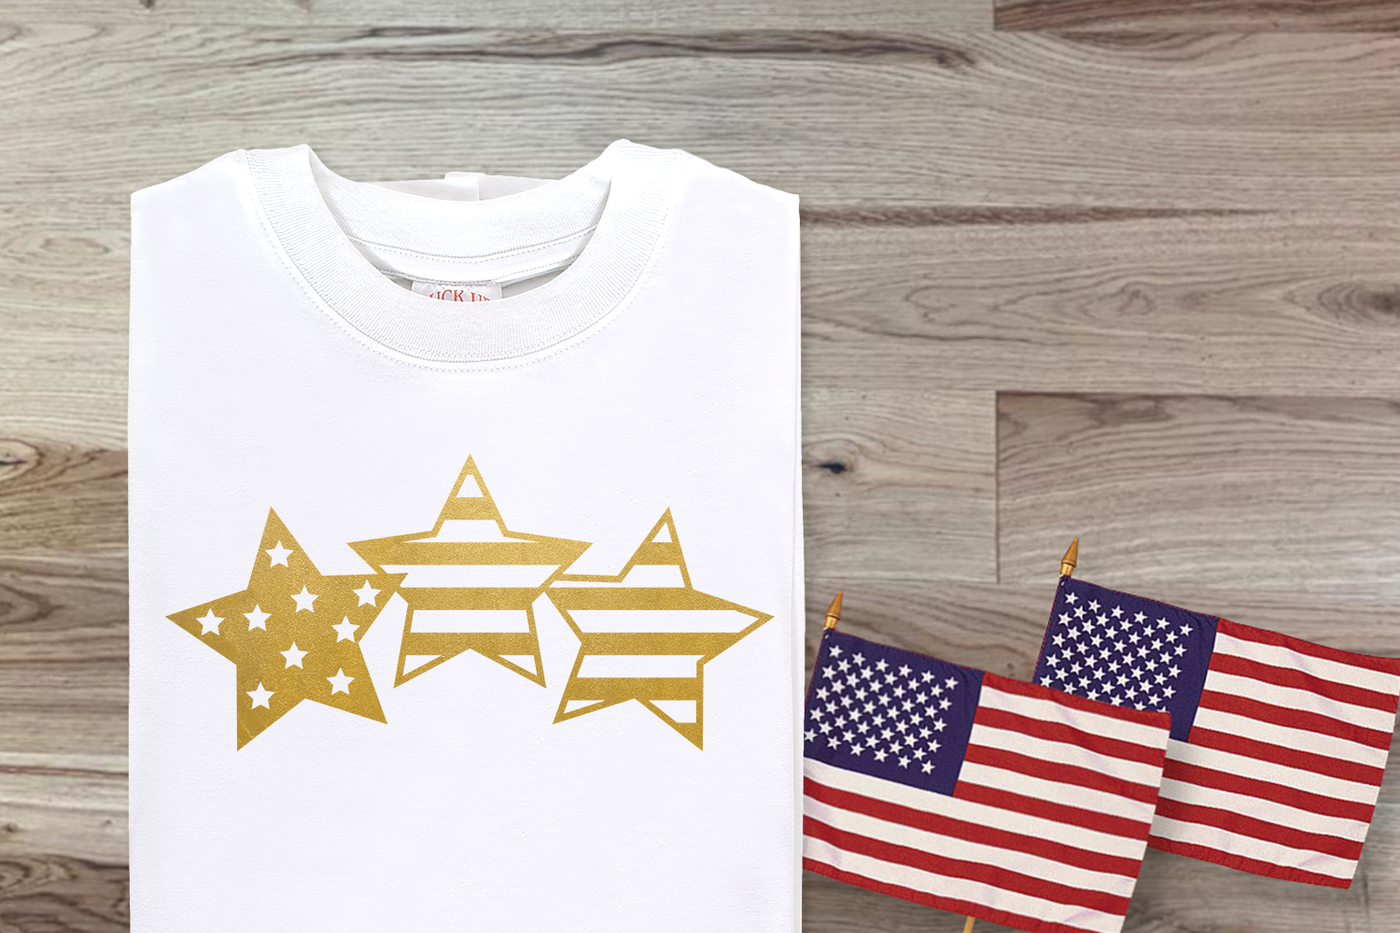 Trio of stars with stars and stripes pattern SVG design. Shown in gold on a white shirt.